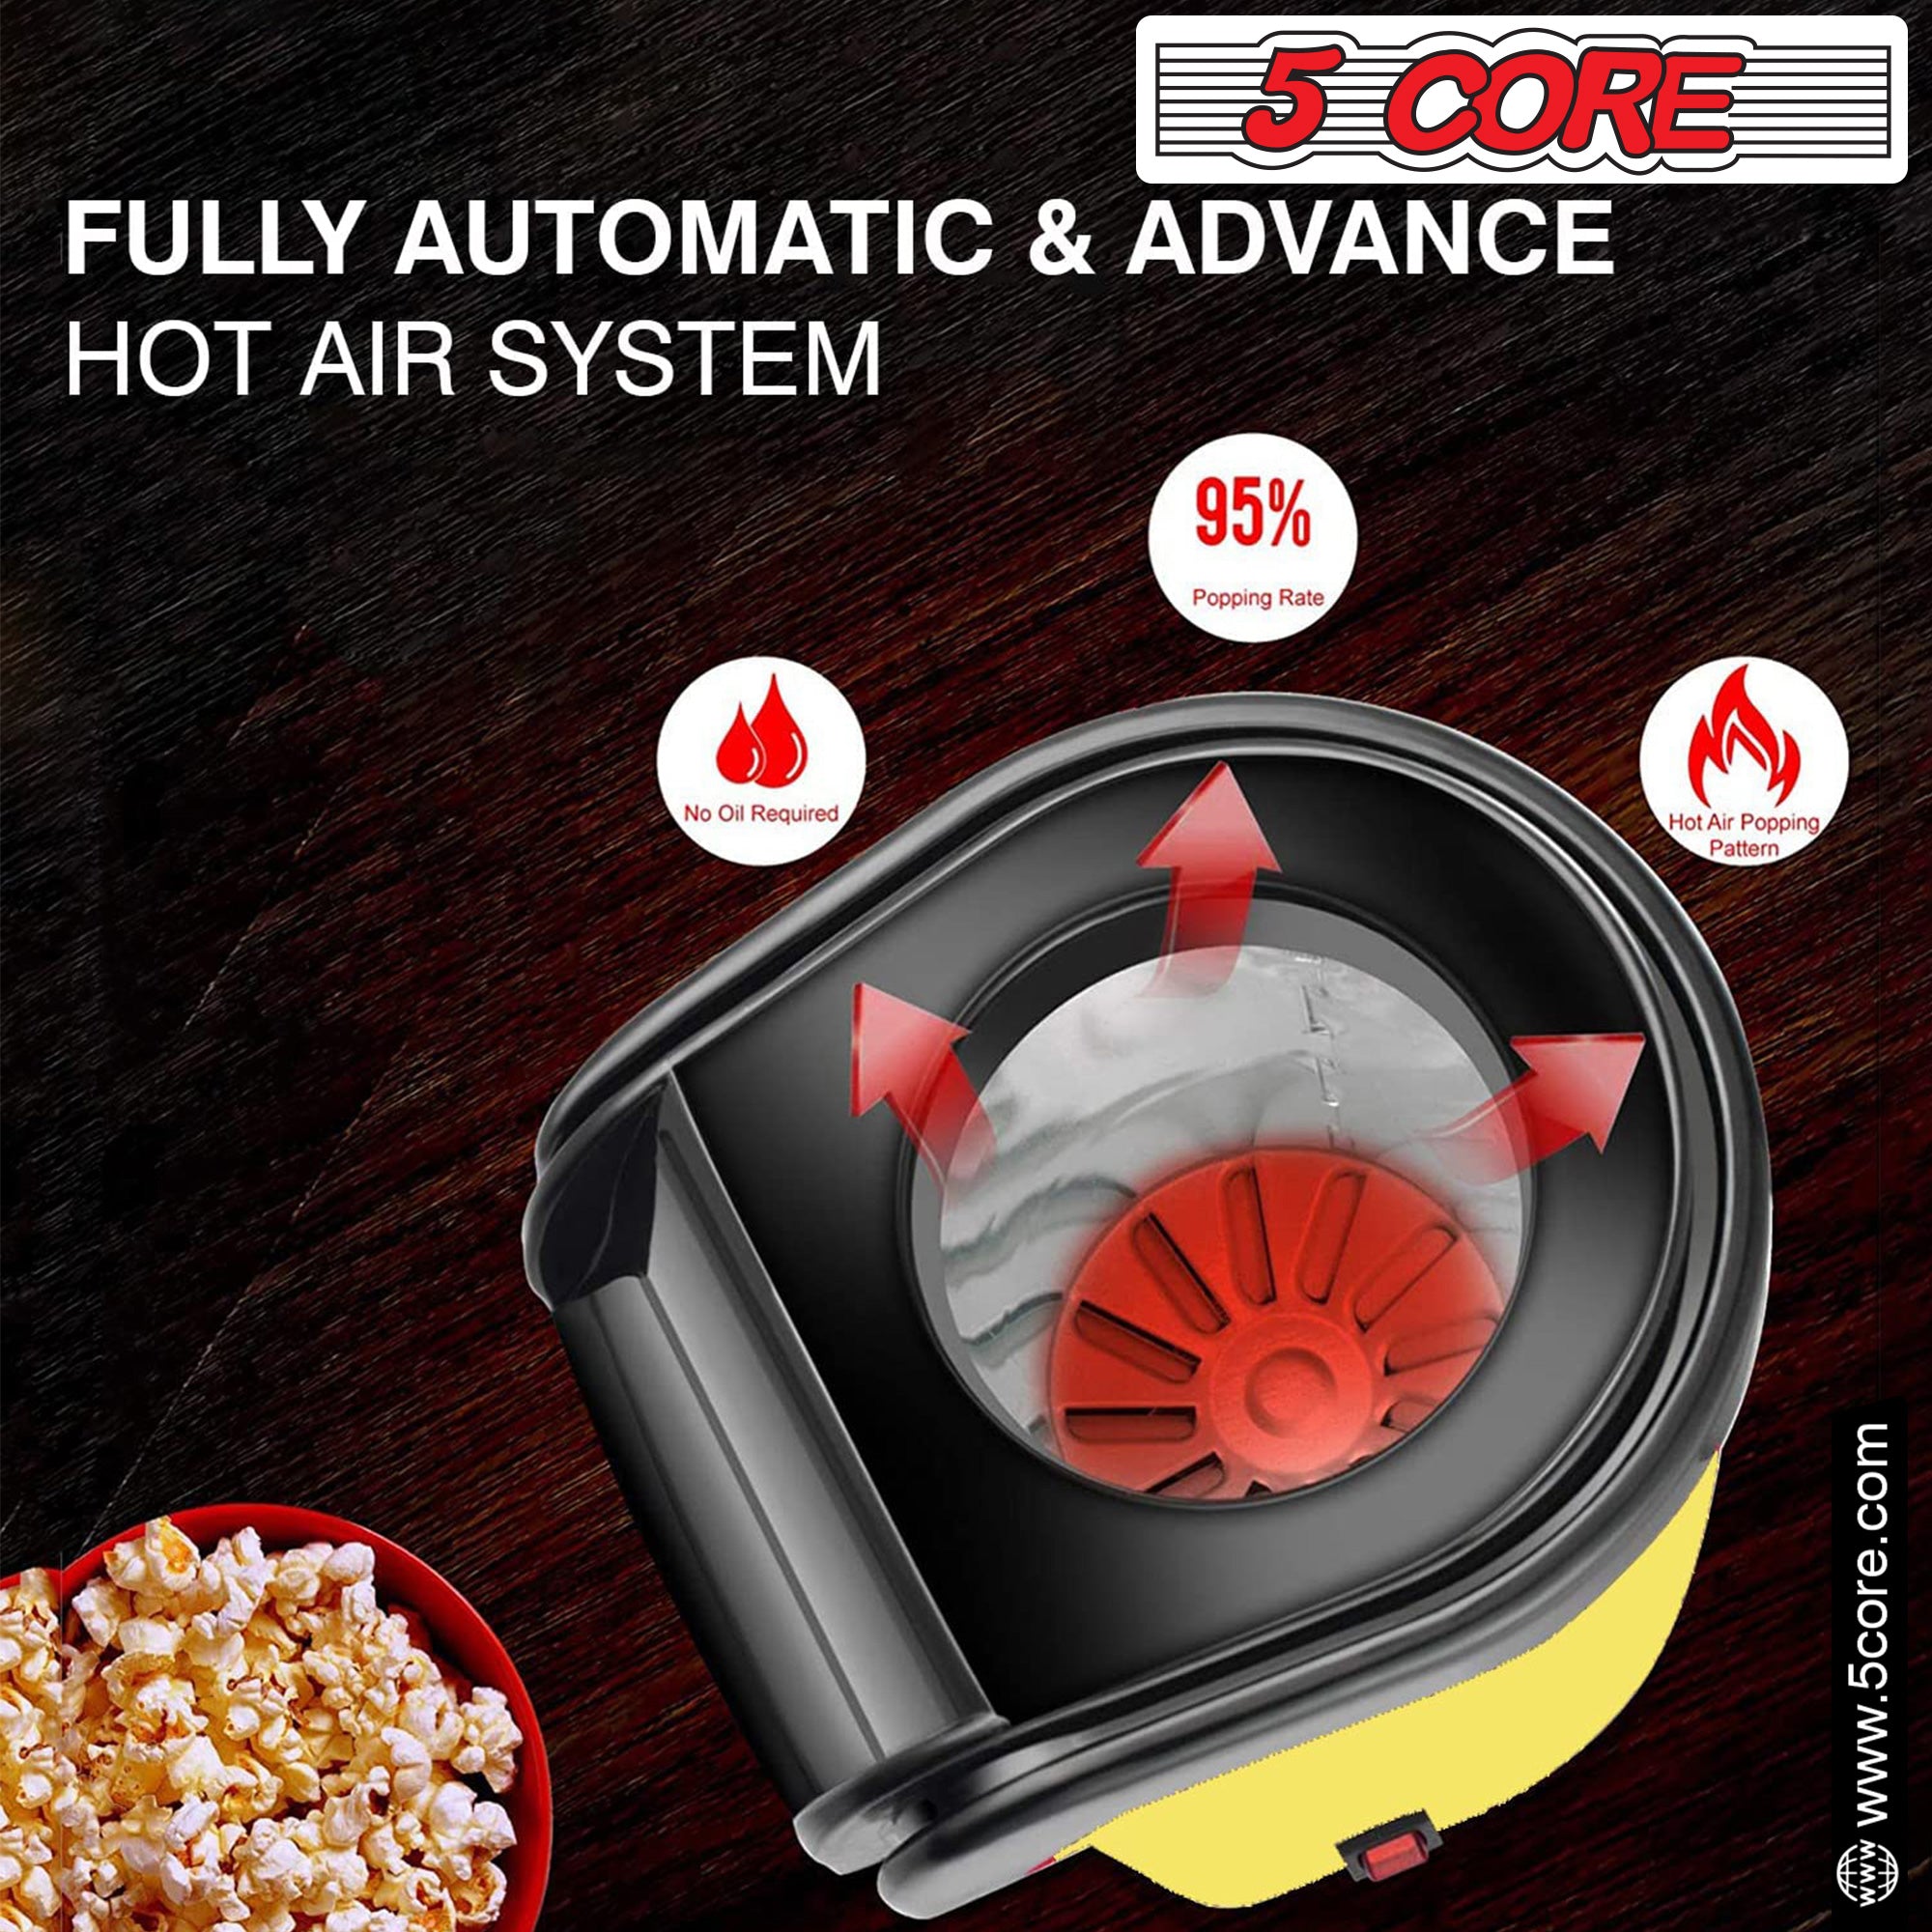 5 Core Popcorn machine fully automatic & advance hot air system.